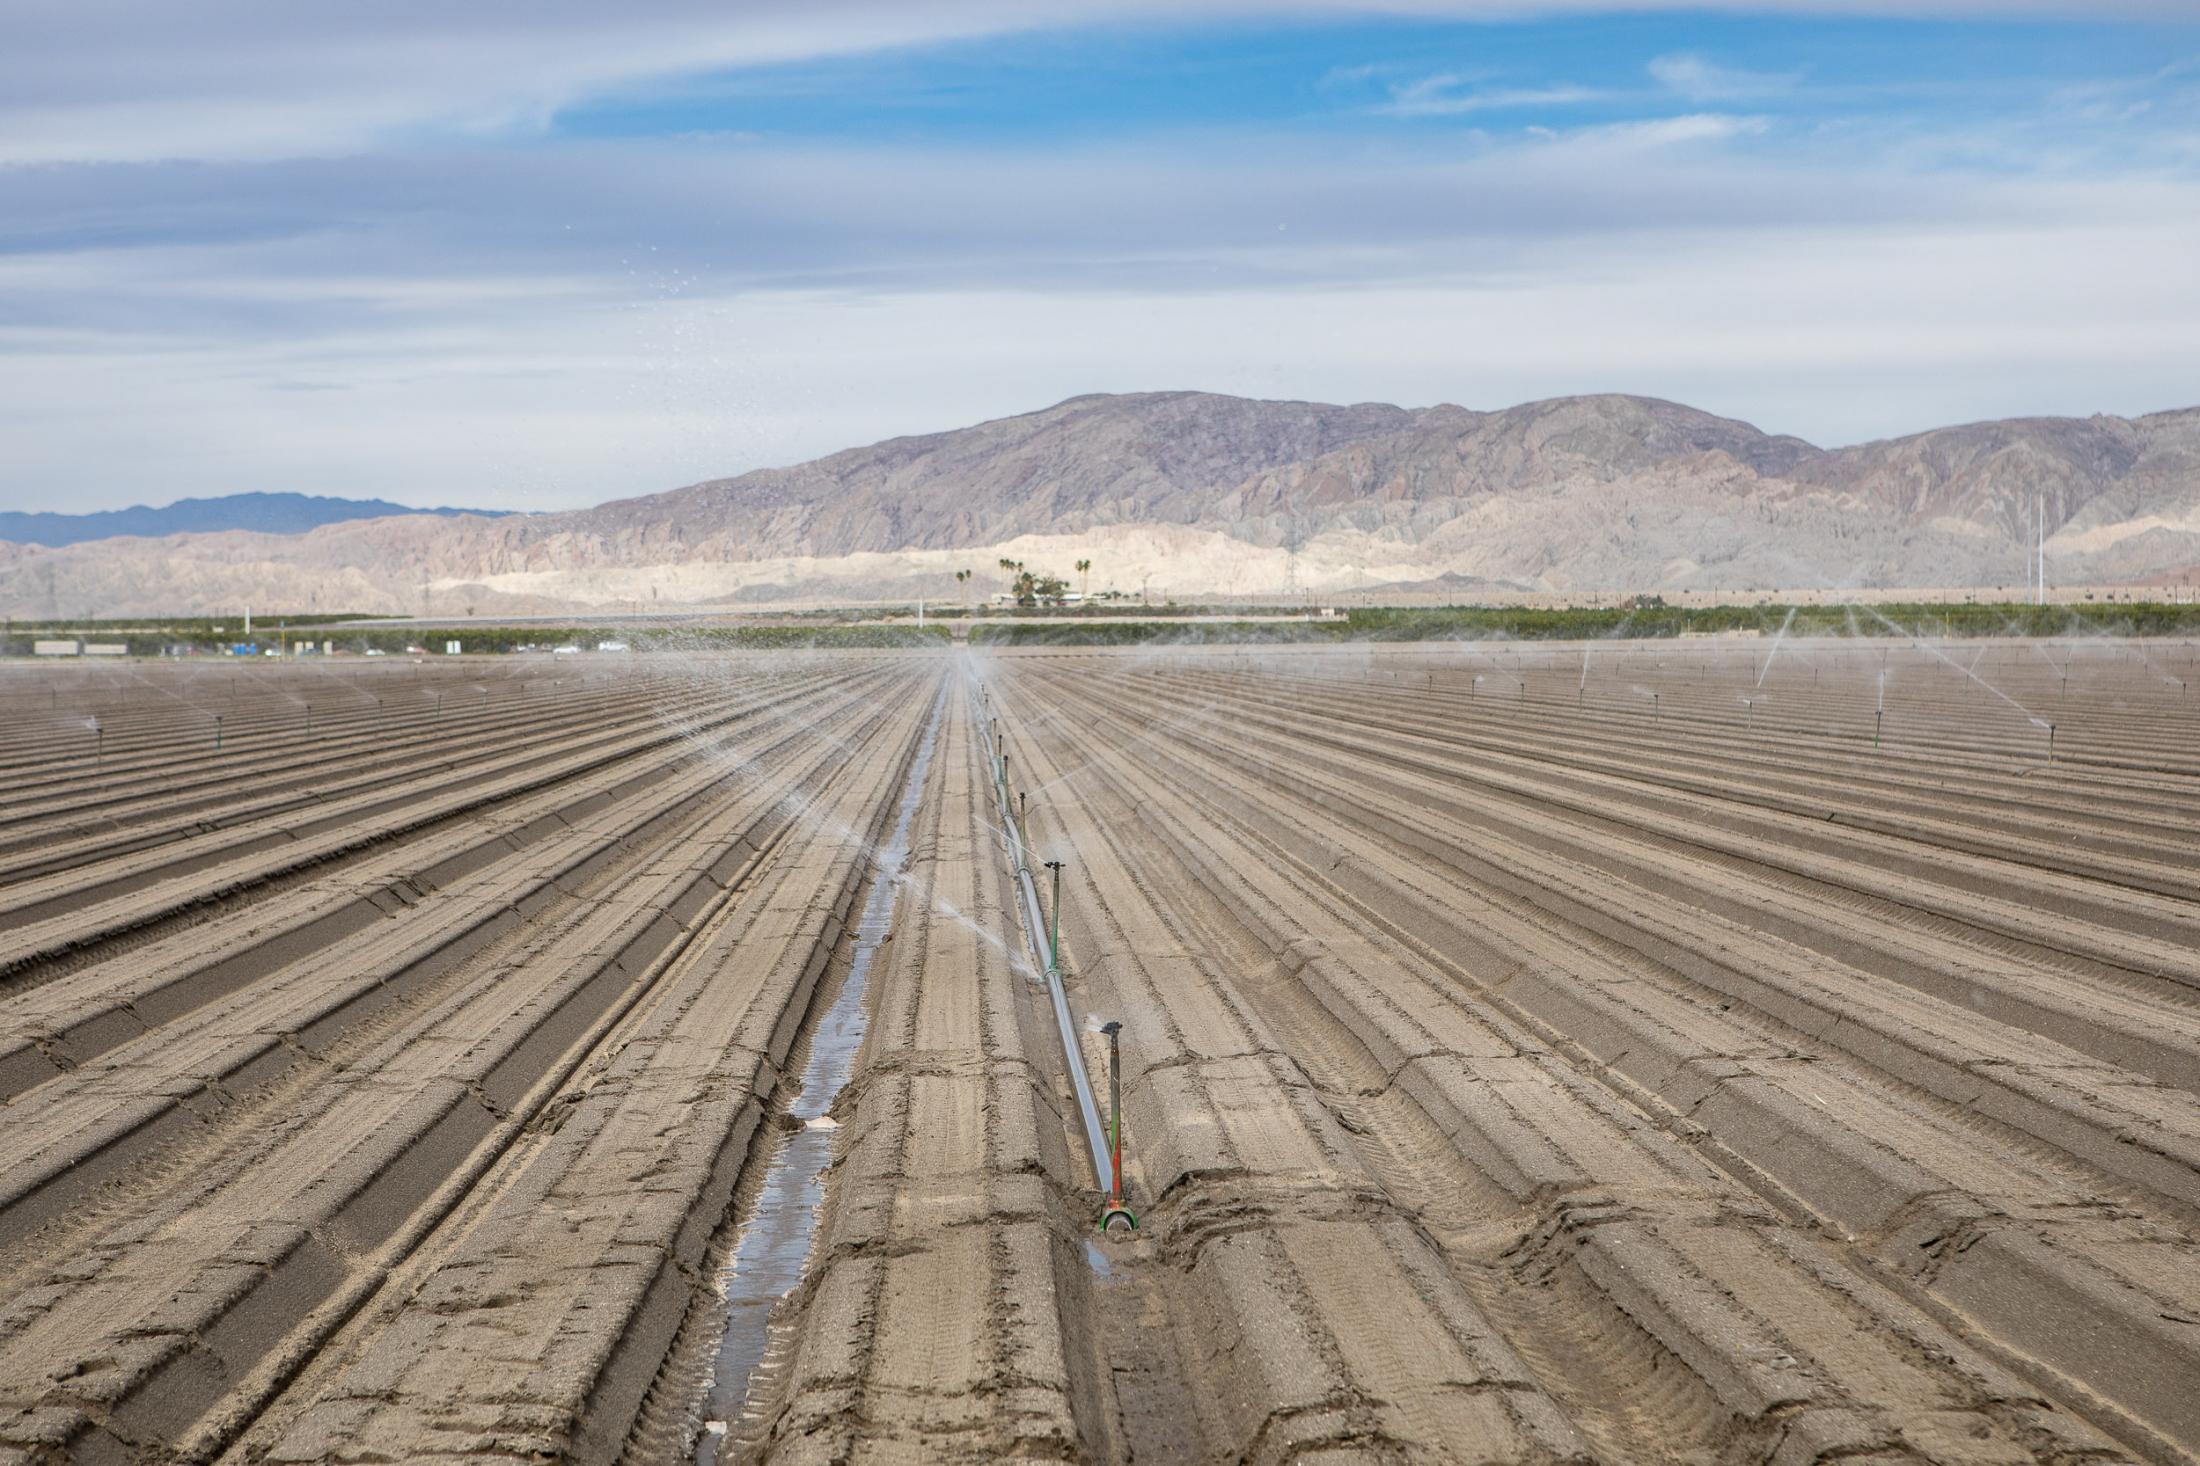  - The Salton Sea -  A field is being irrigated near Coachella. This is the...